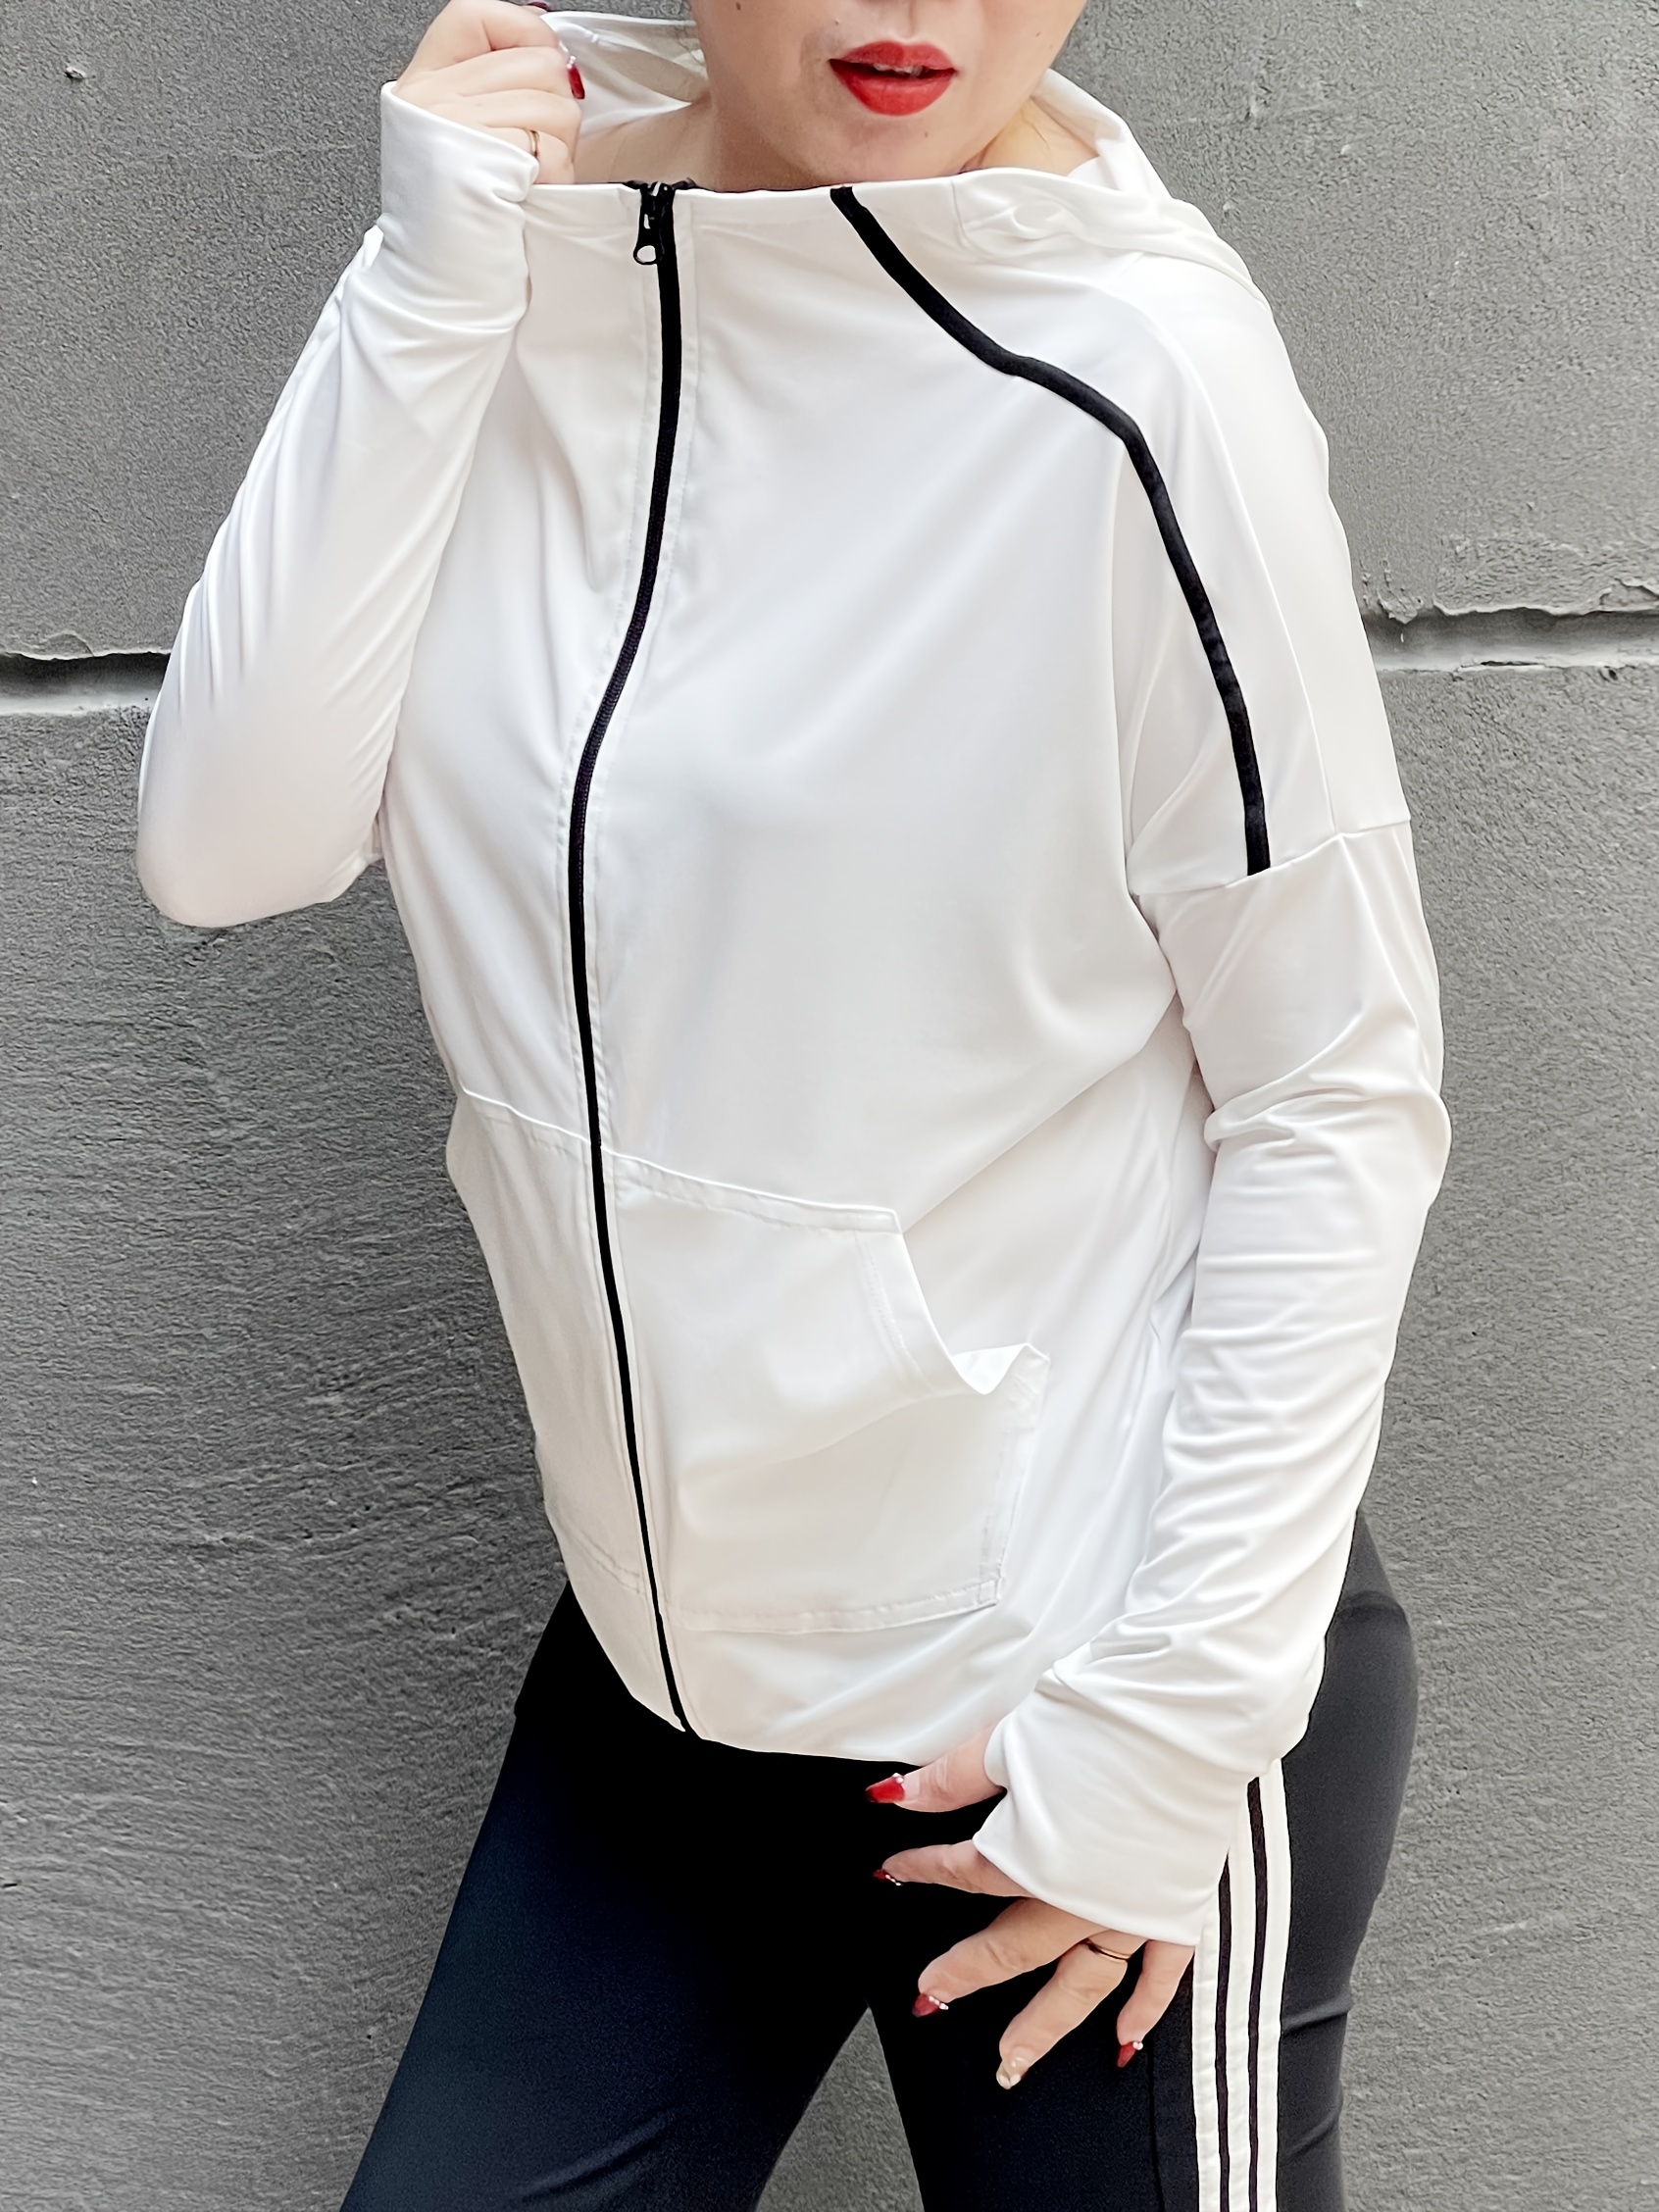 Lole Womens Activewear White Zip Jacket With Ruching - Size XL READ